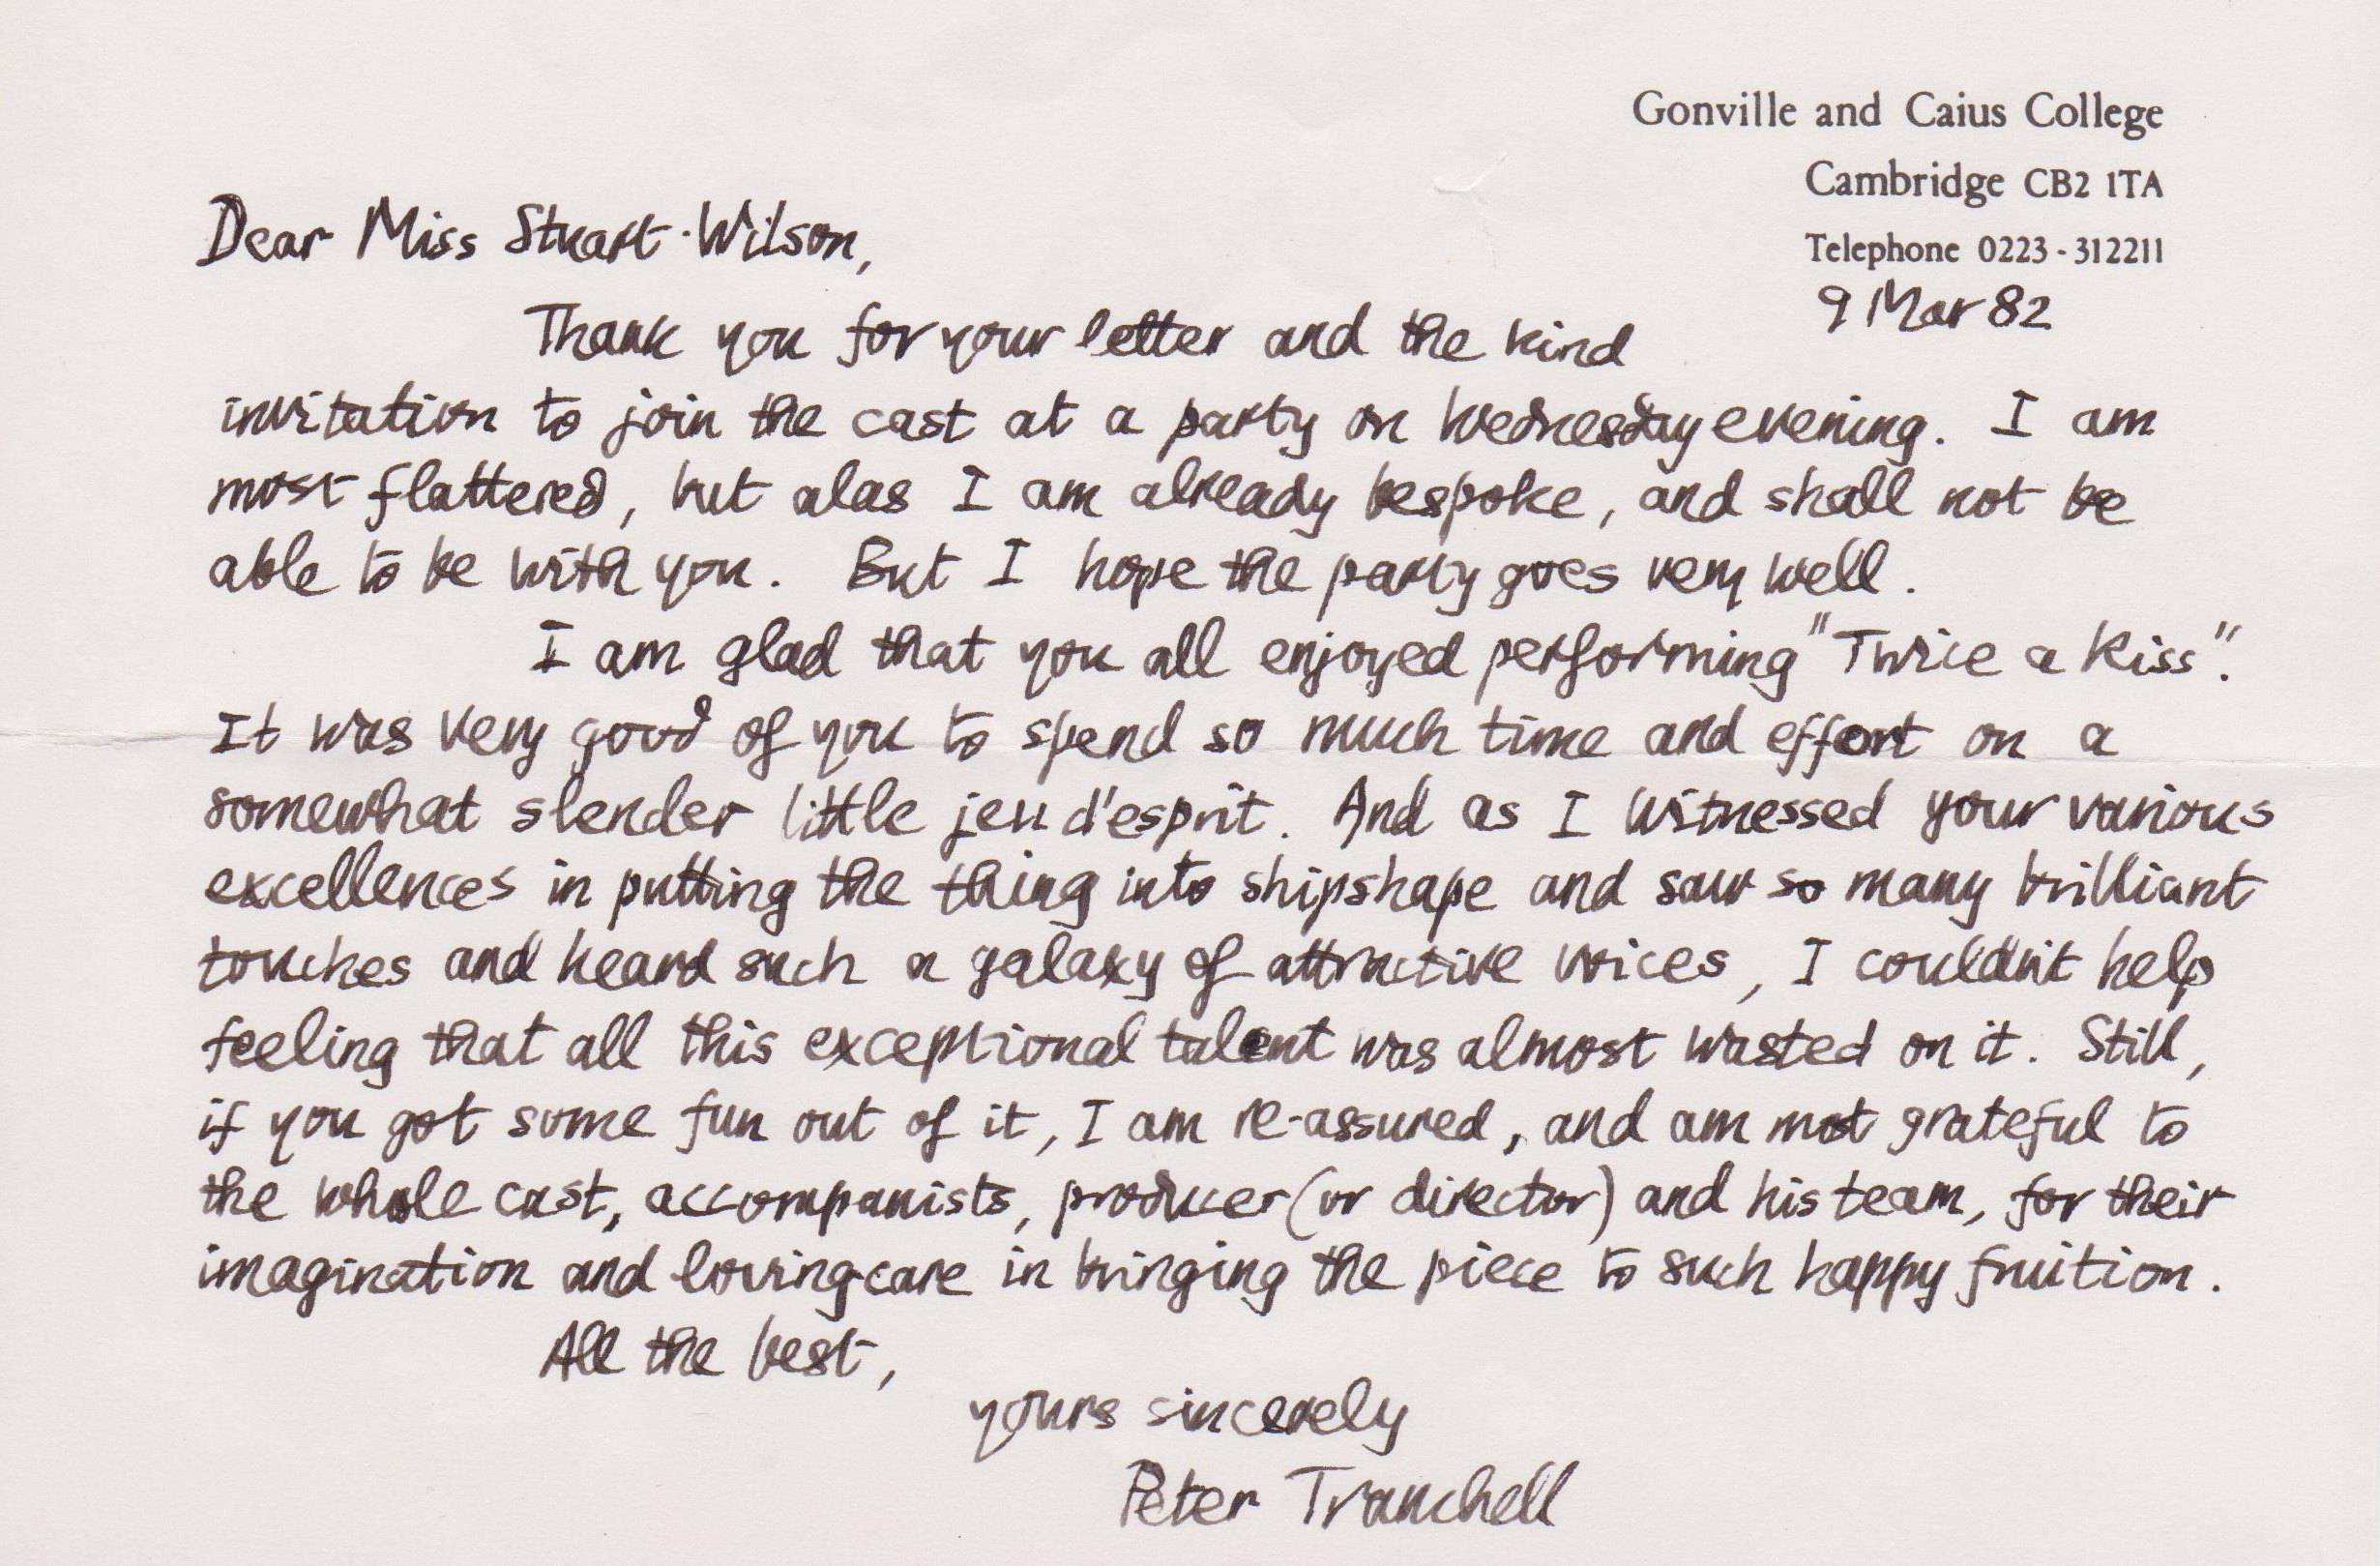 Letter from Peter Tranchell to Fiona Stuart-Wilson following the performance of Twice A Kiss at the Cambridge ADC in 1982